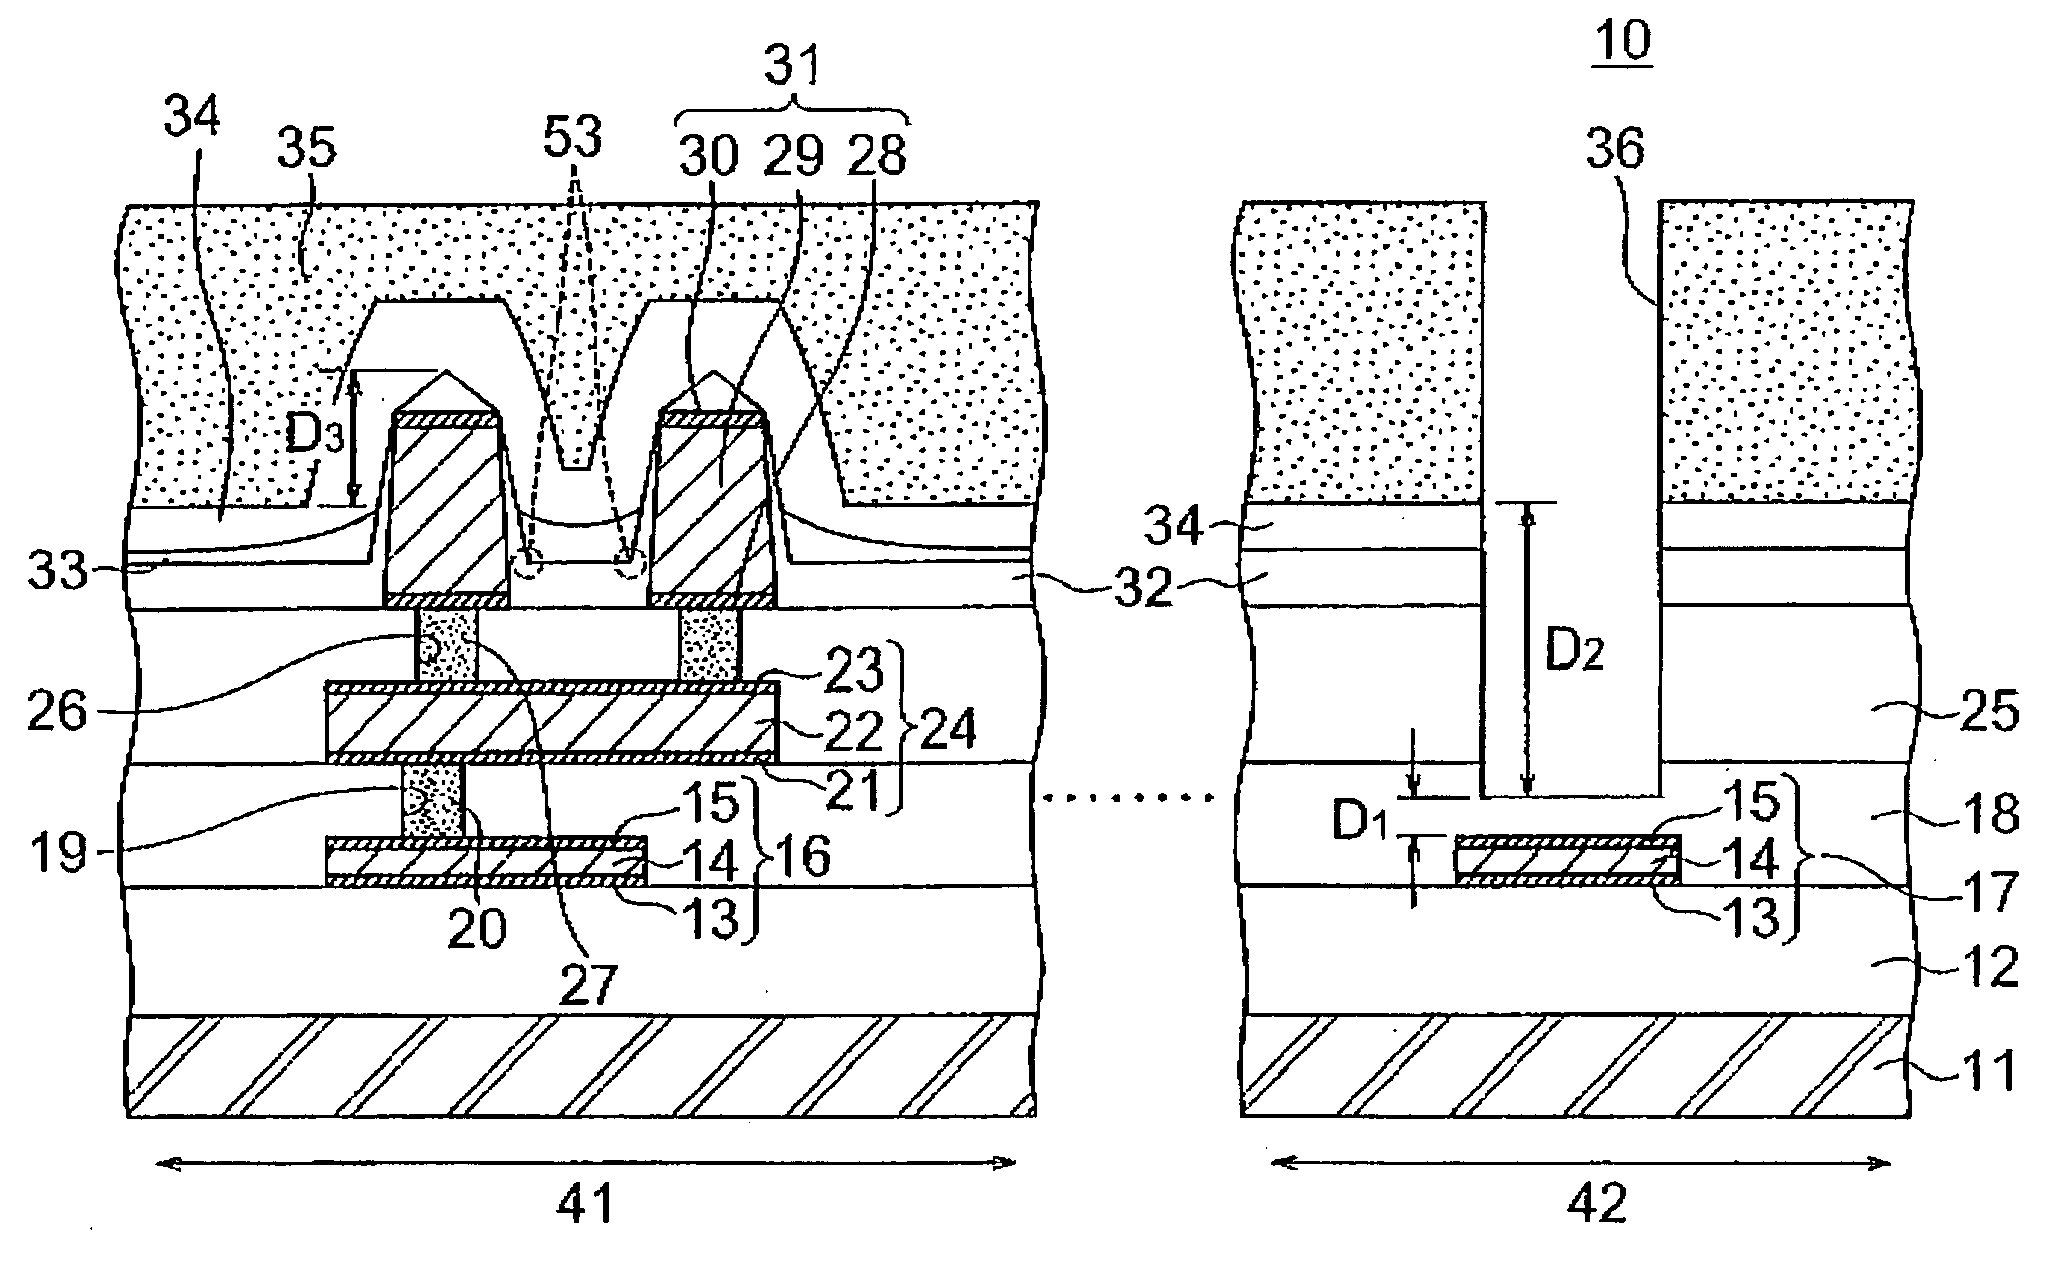 Semiconductor device having a modified dielectric film